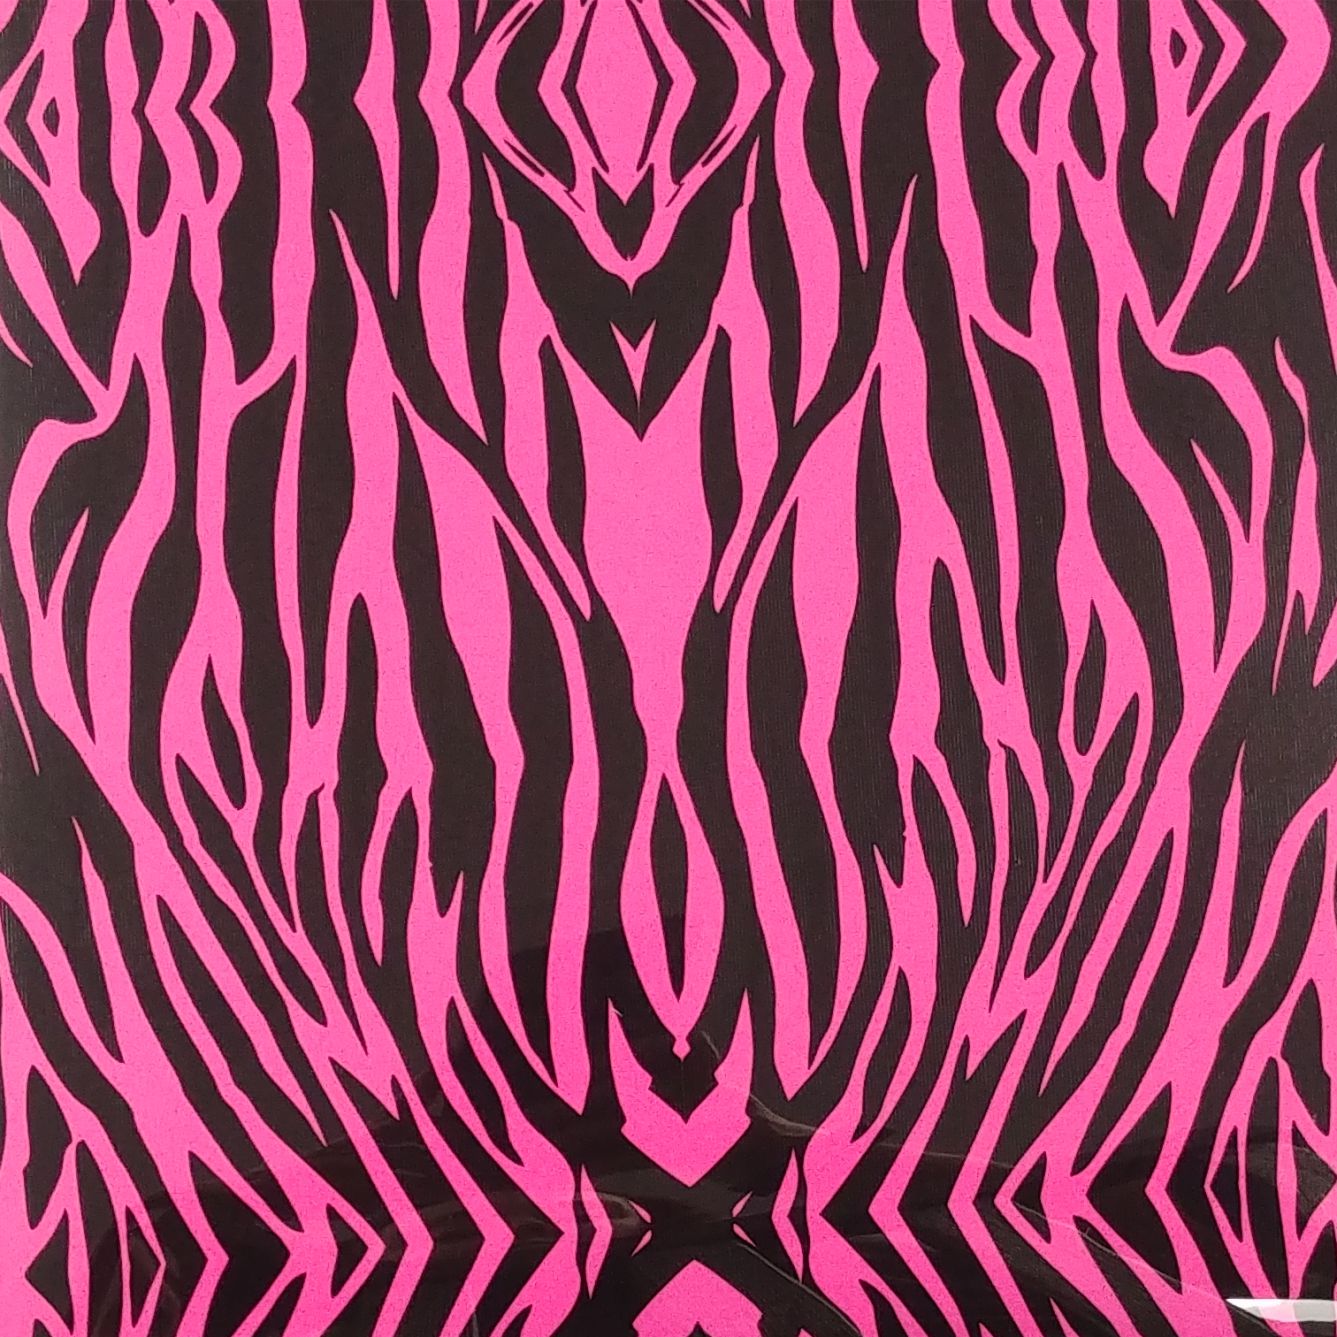 ThermoFlex HTV Fashion Patterns 12x15 Sheets-Hot Pink Zebra SALE While Supplies Last